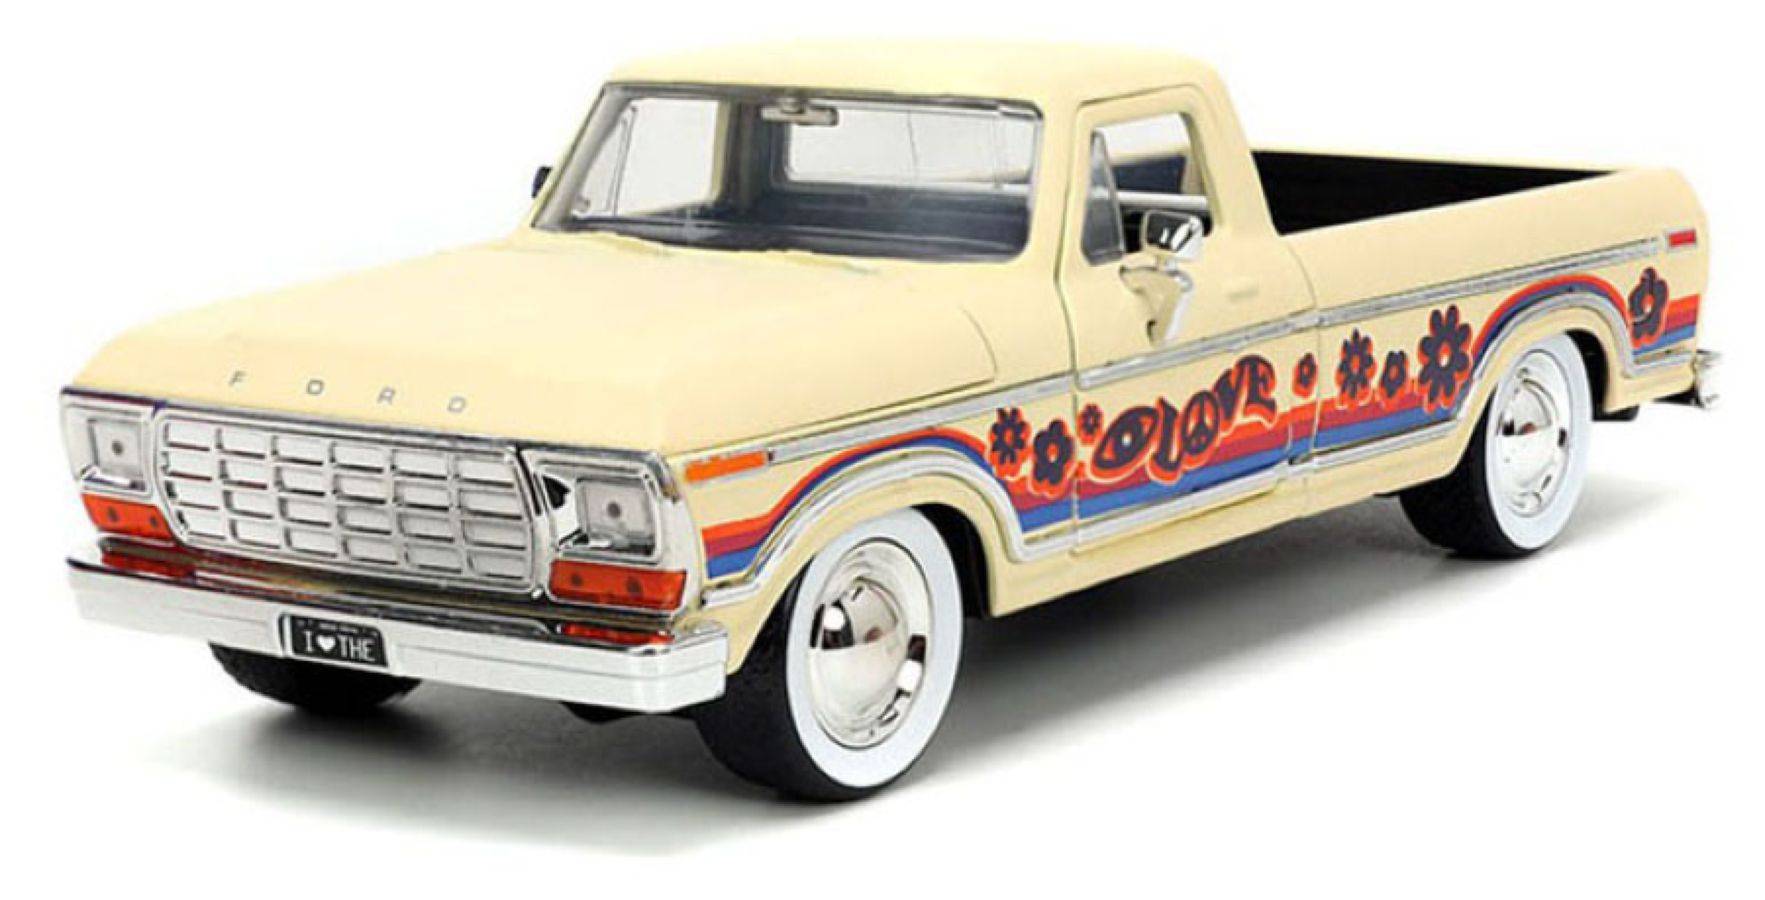 I Love The - 70's 1979 Ford F150 1:24 Scale